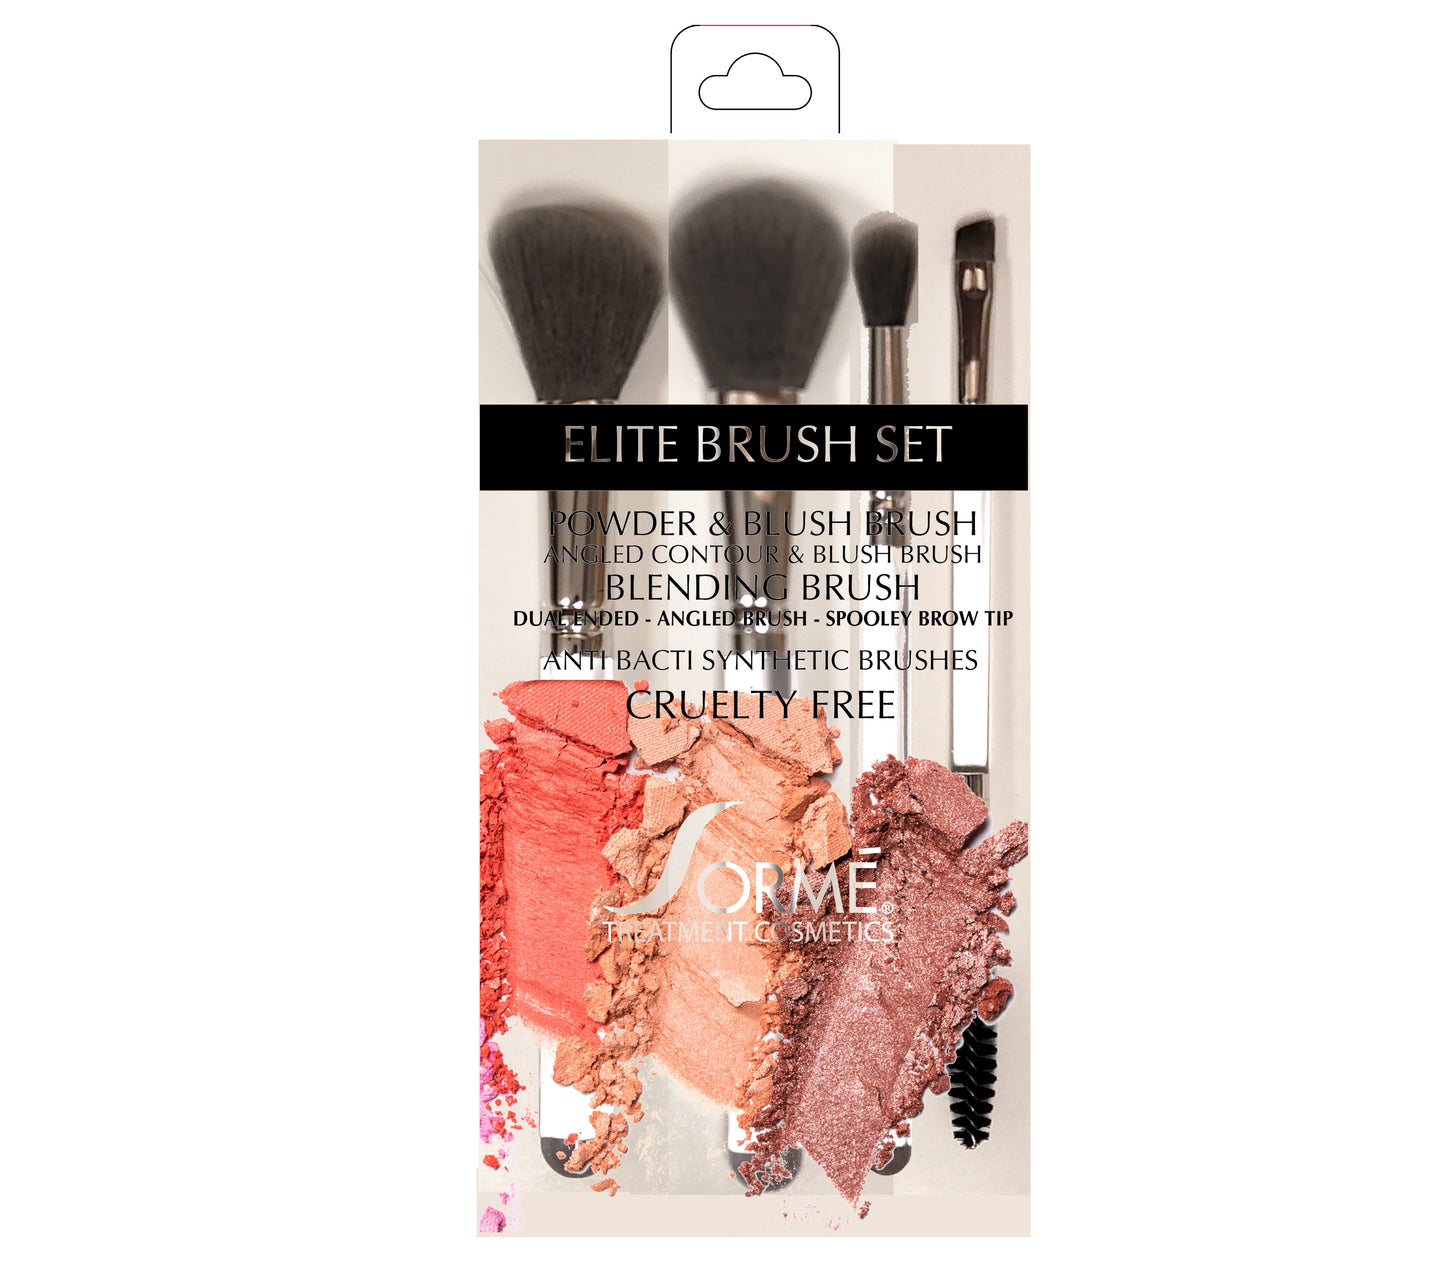 SORMÉ Anti Bacterial Synthetic Cruelty Free Makeup Brushes